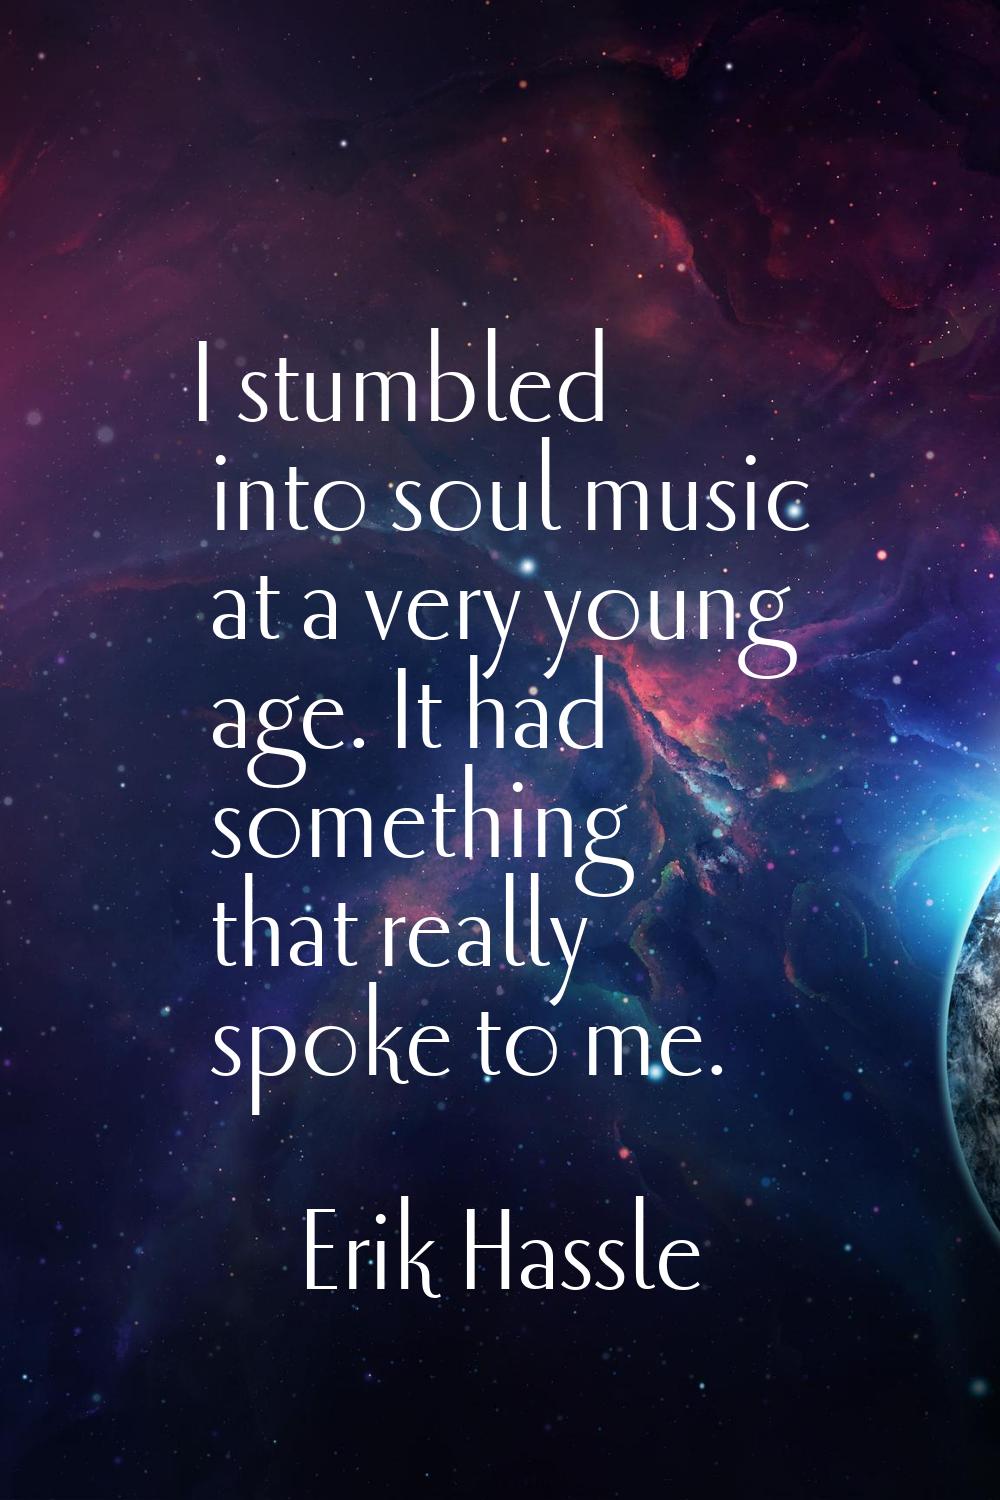 I stumbled into soul music at a very young age. It had something that really spoke to me.